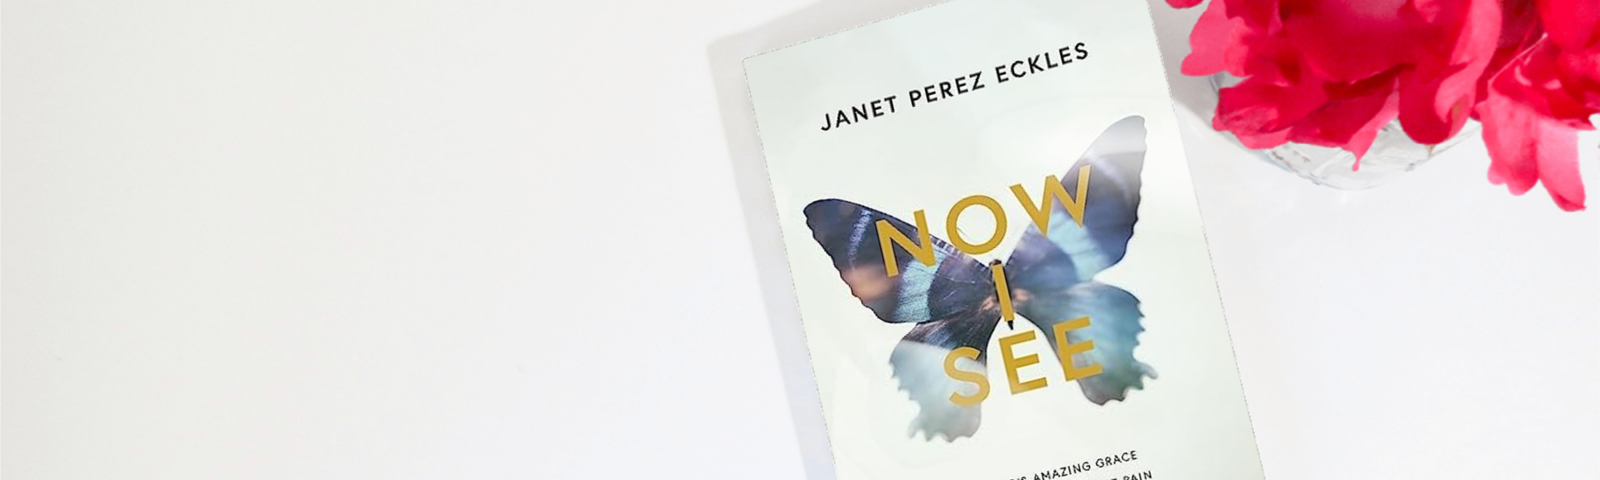 Now I See by Janet Perez Echles (book cover with flowers)